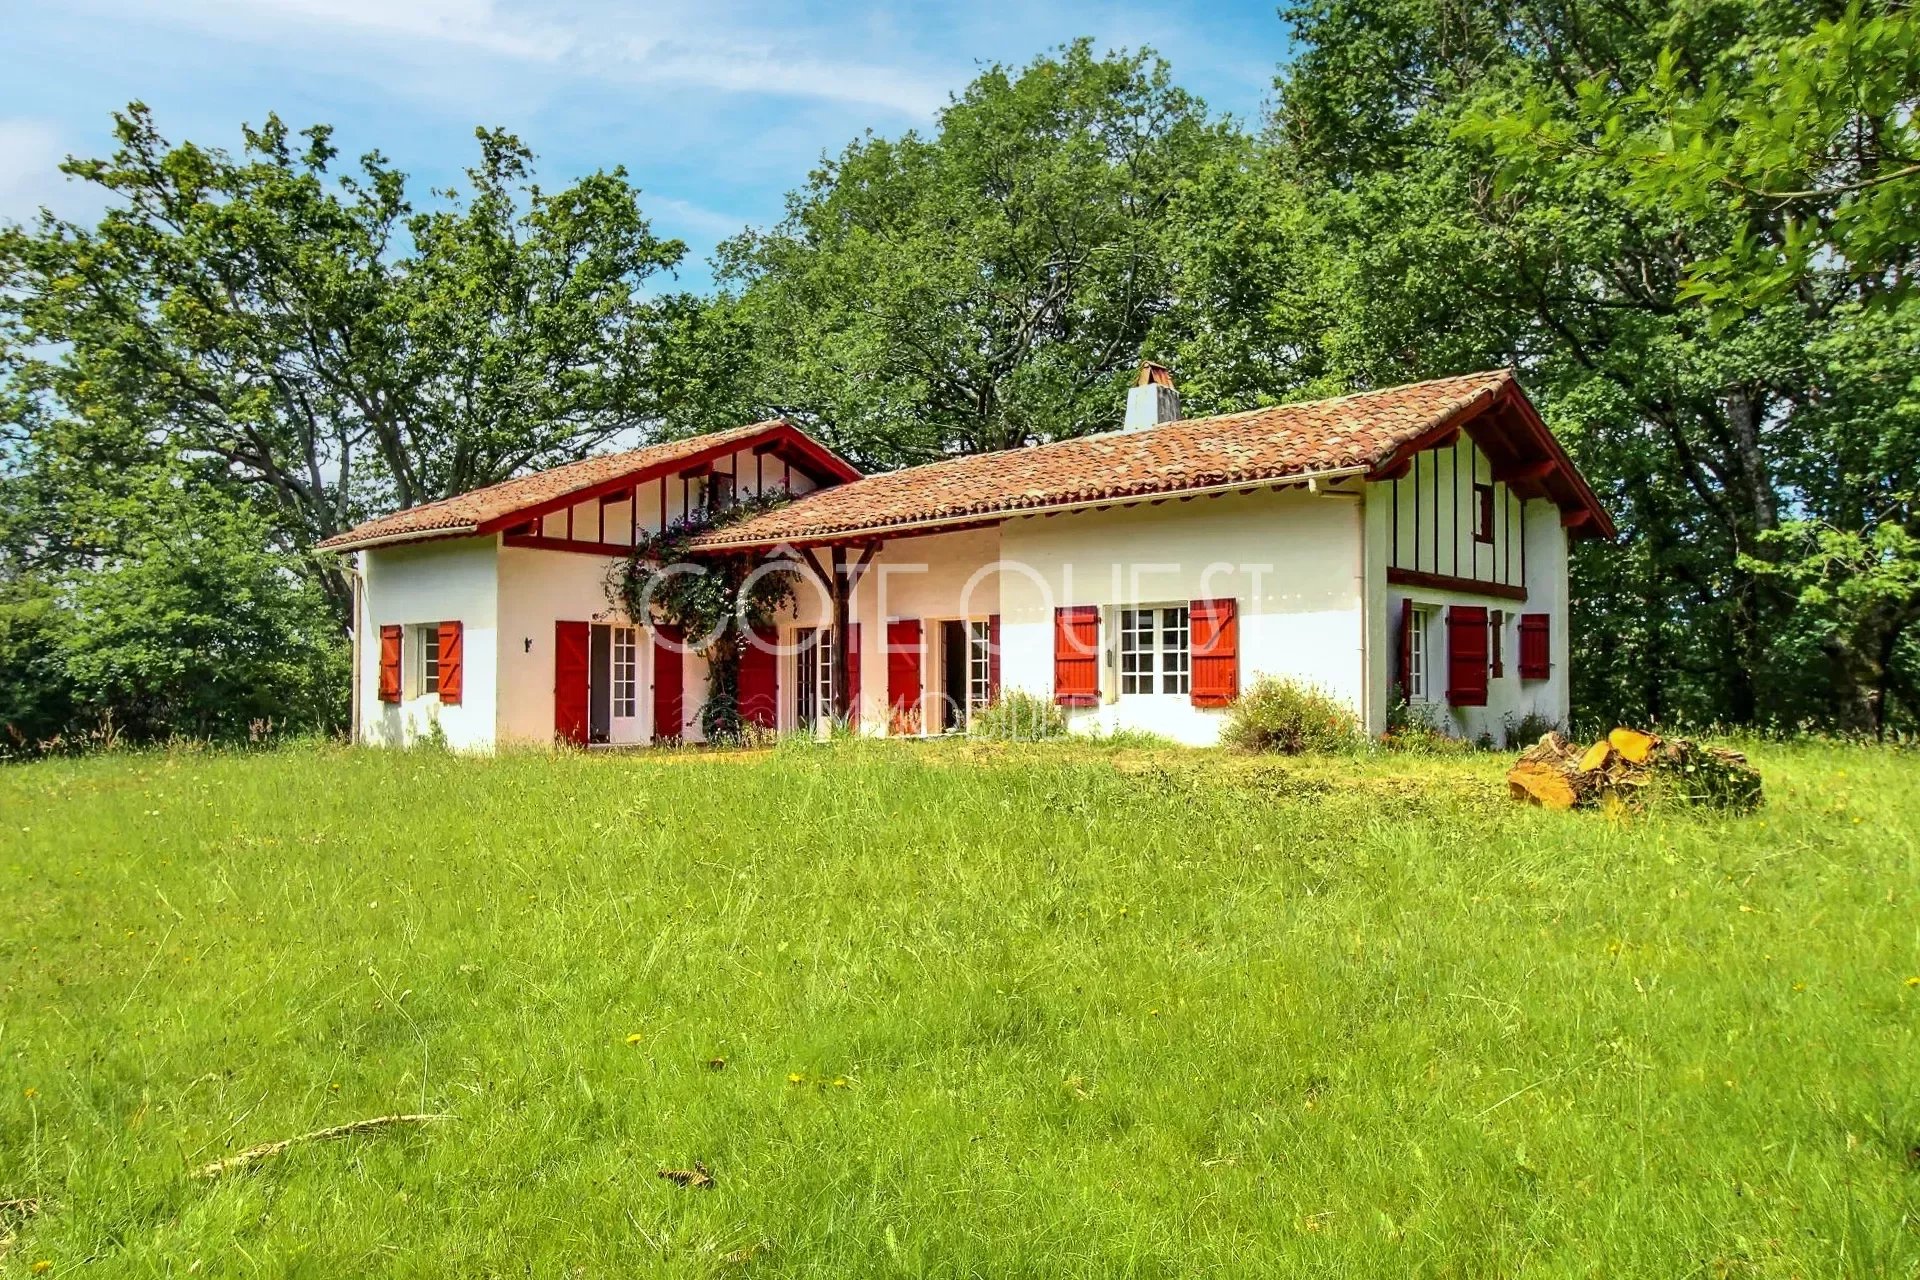 SOURAÏDE – A PROPERTY TO RENOVATE IN A LEAFY ENVIRONMENT